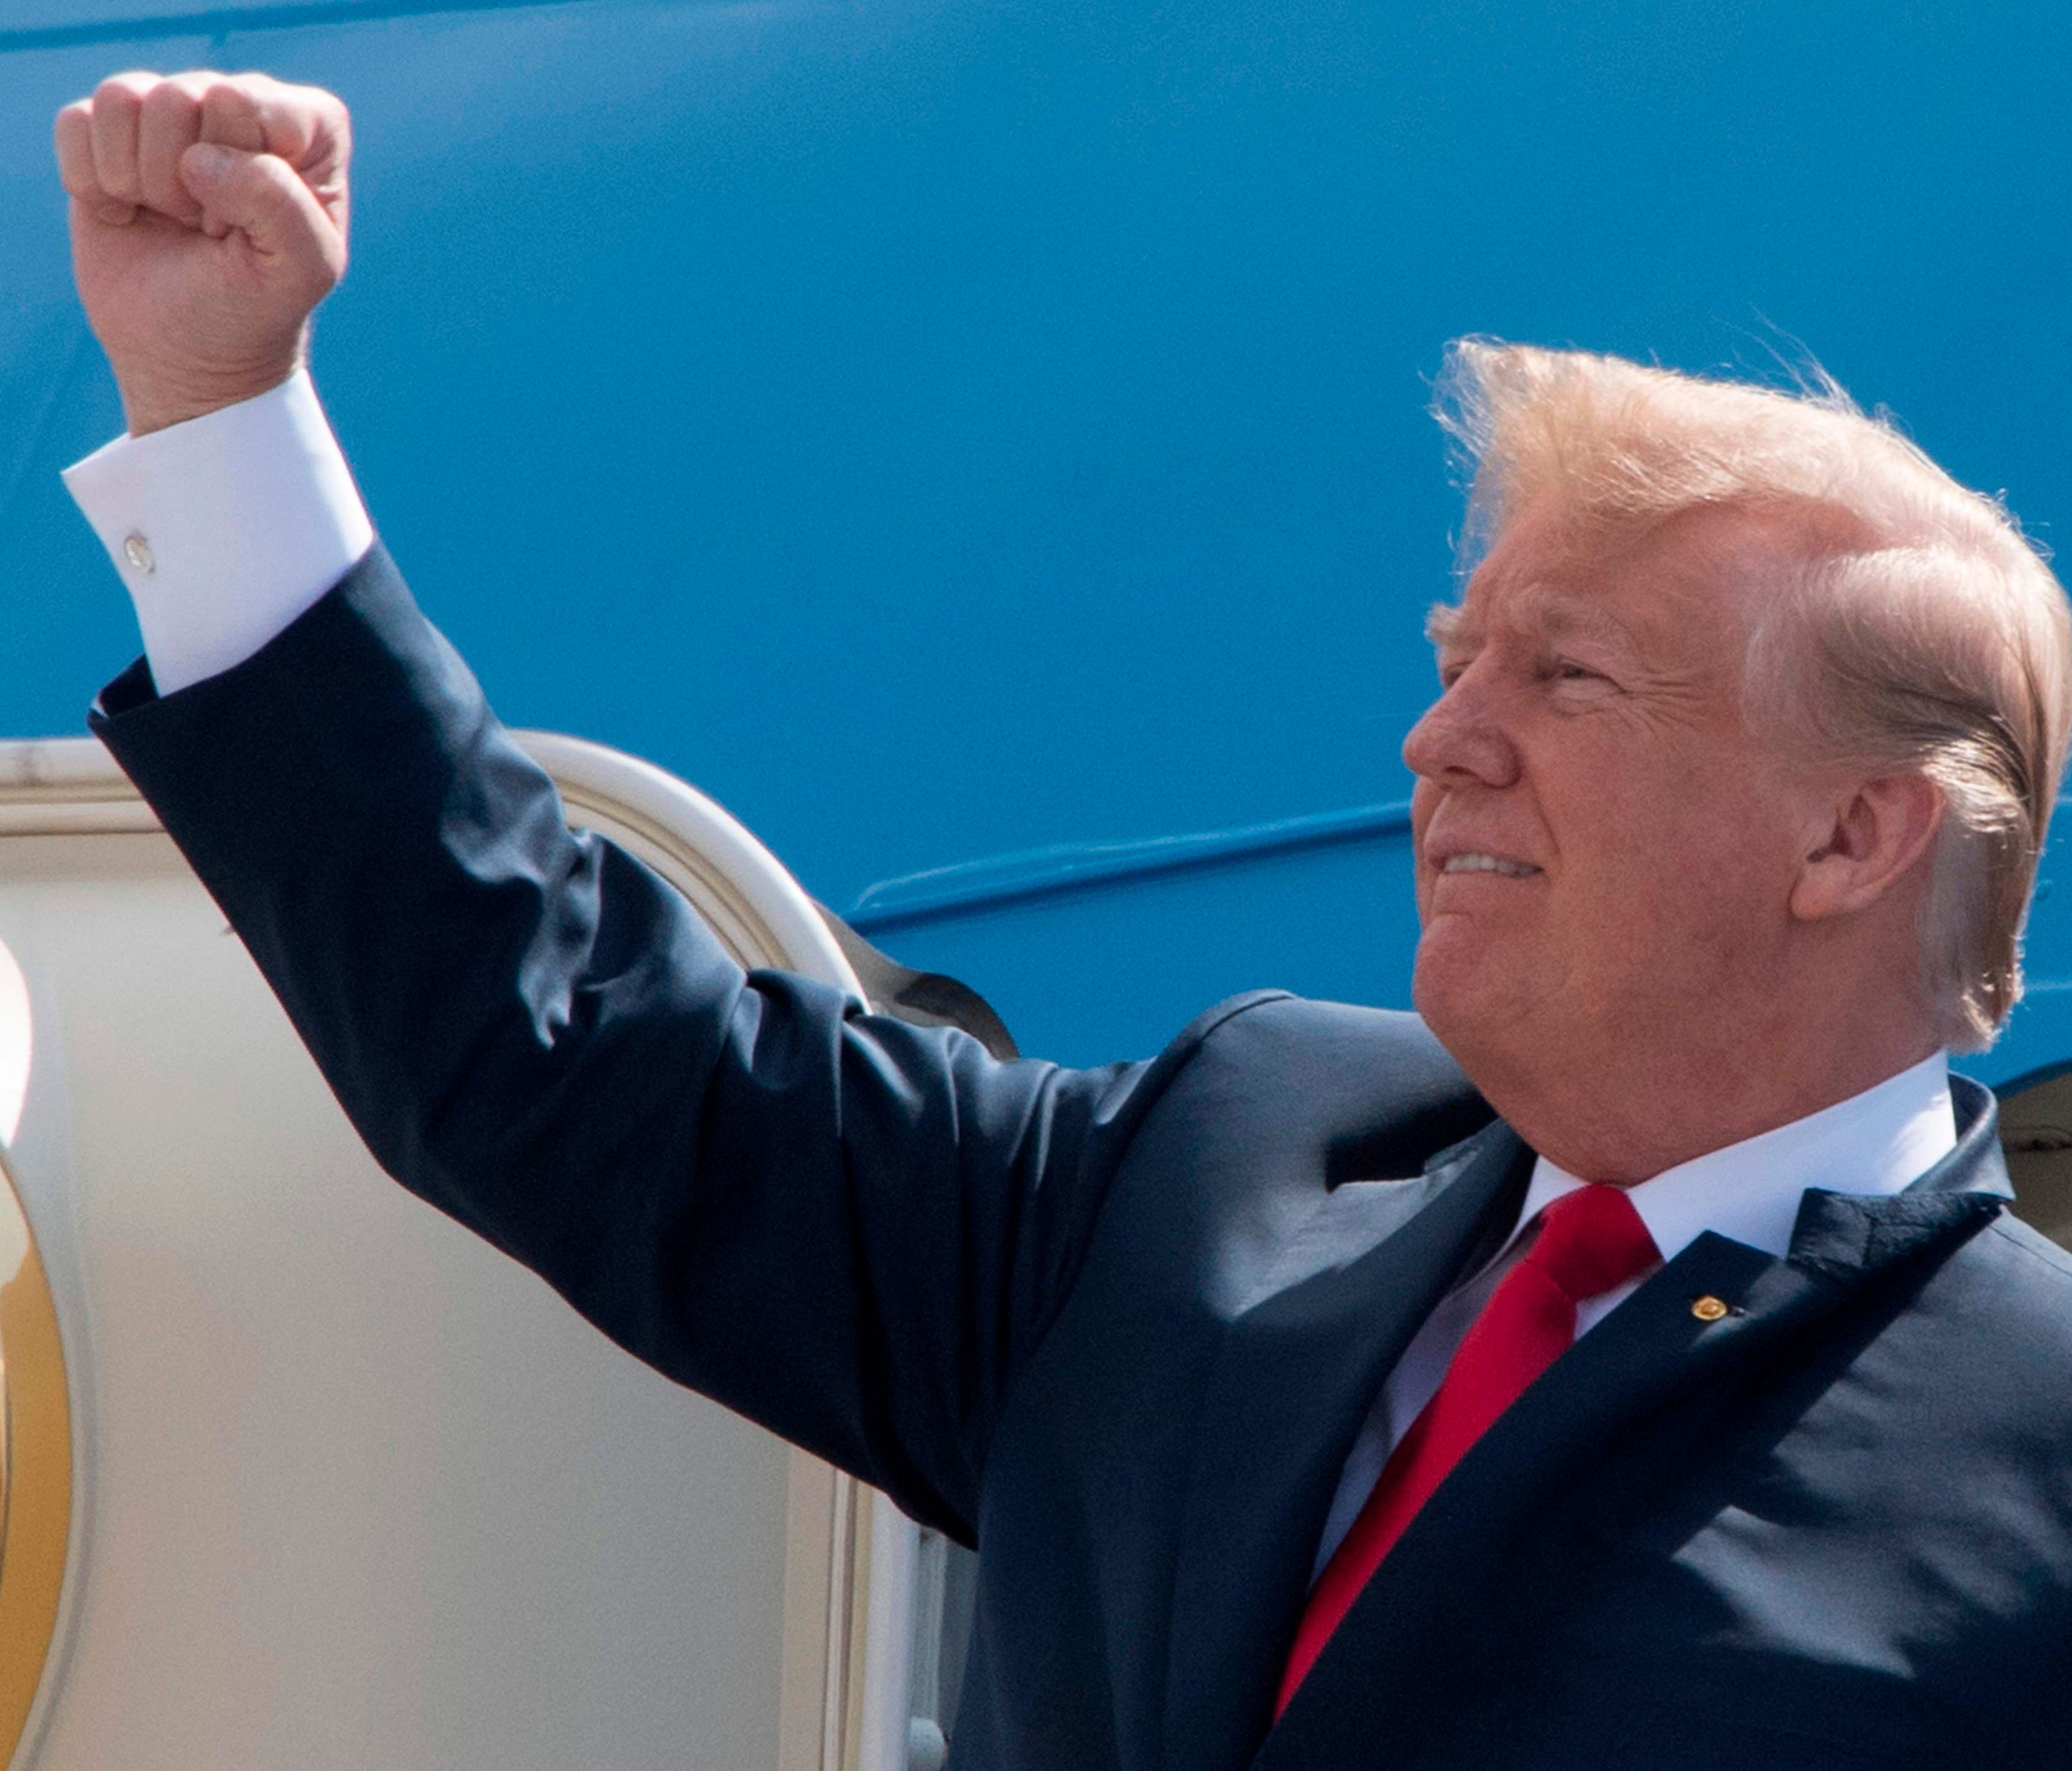 President Trump pumps his fist to the crowd as he arrives at Ellington Field Joint Reserve Base in Houston, Texas on May 31, 2018.